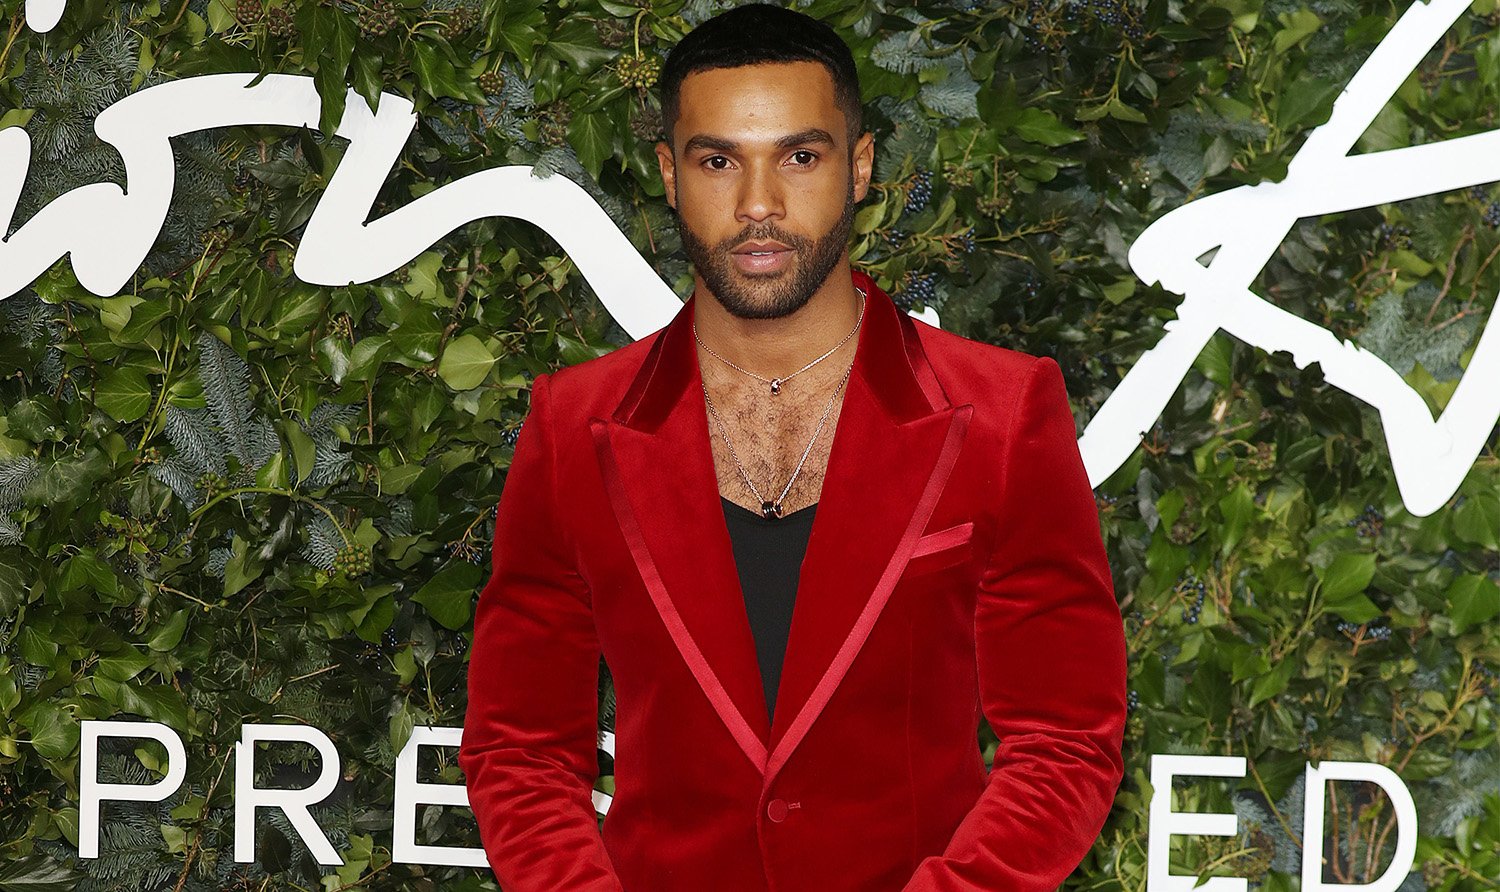 Emily in Paris star Lucien Laviscount at The Fashion Awards 2021